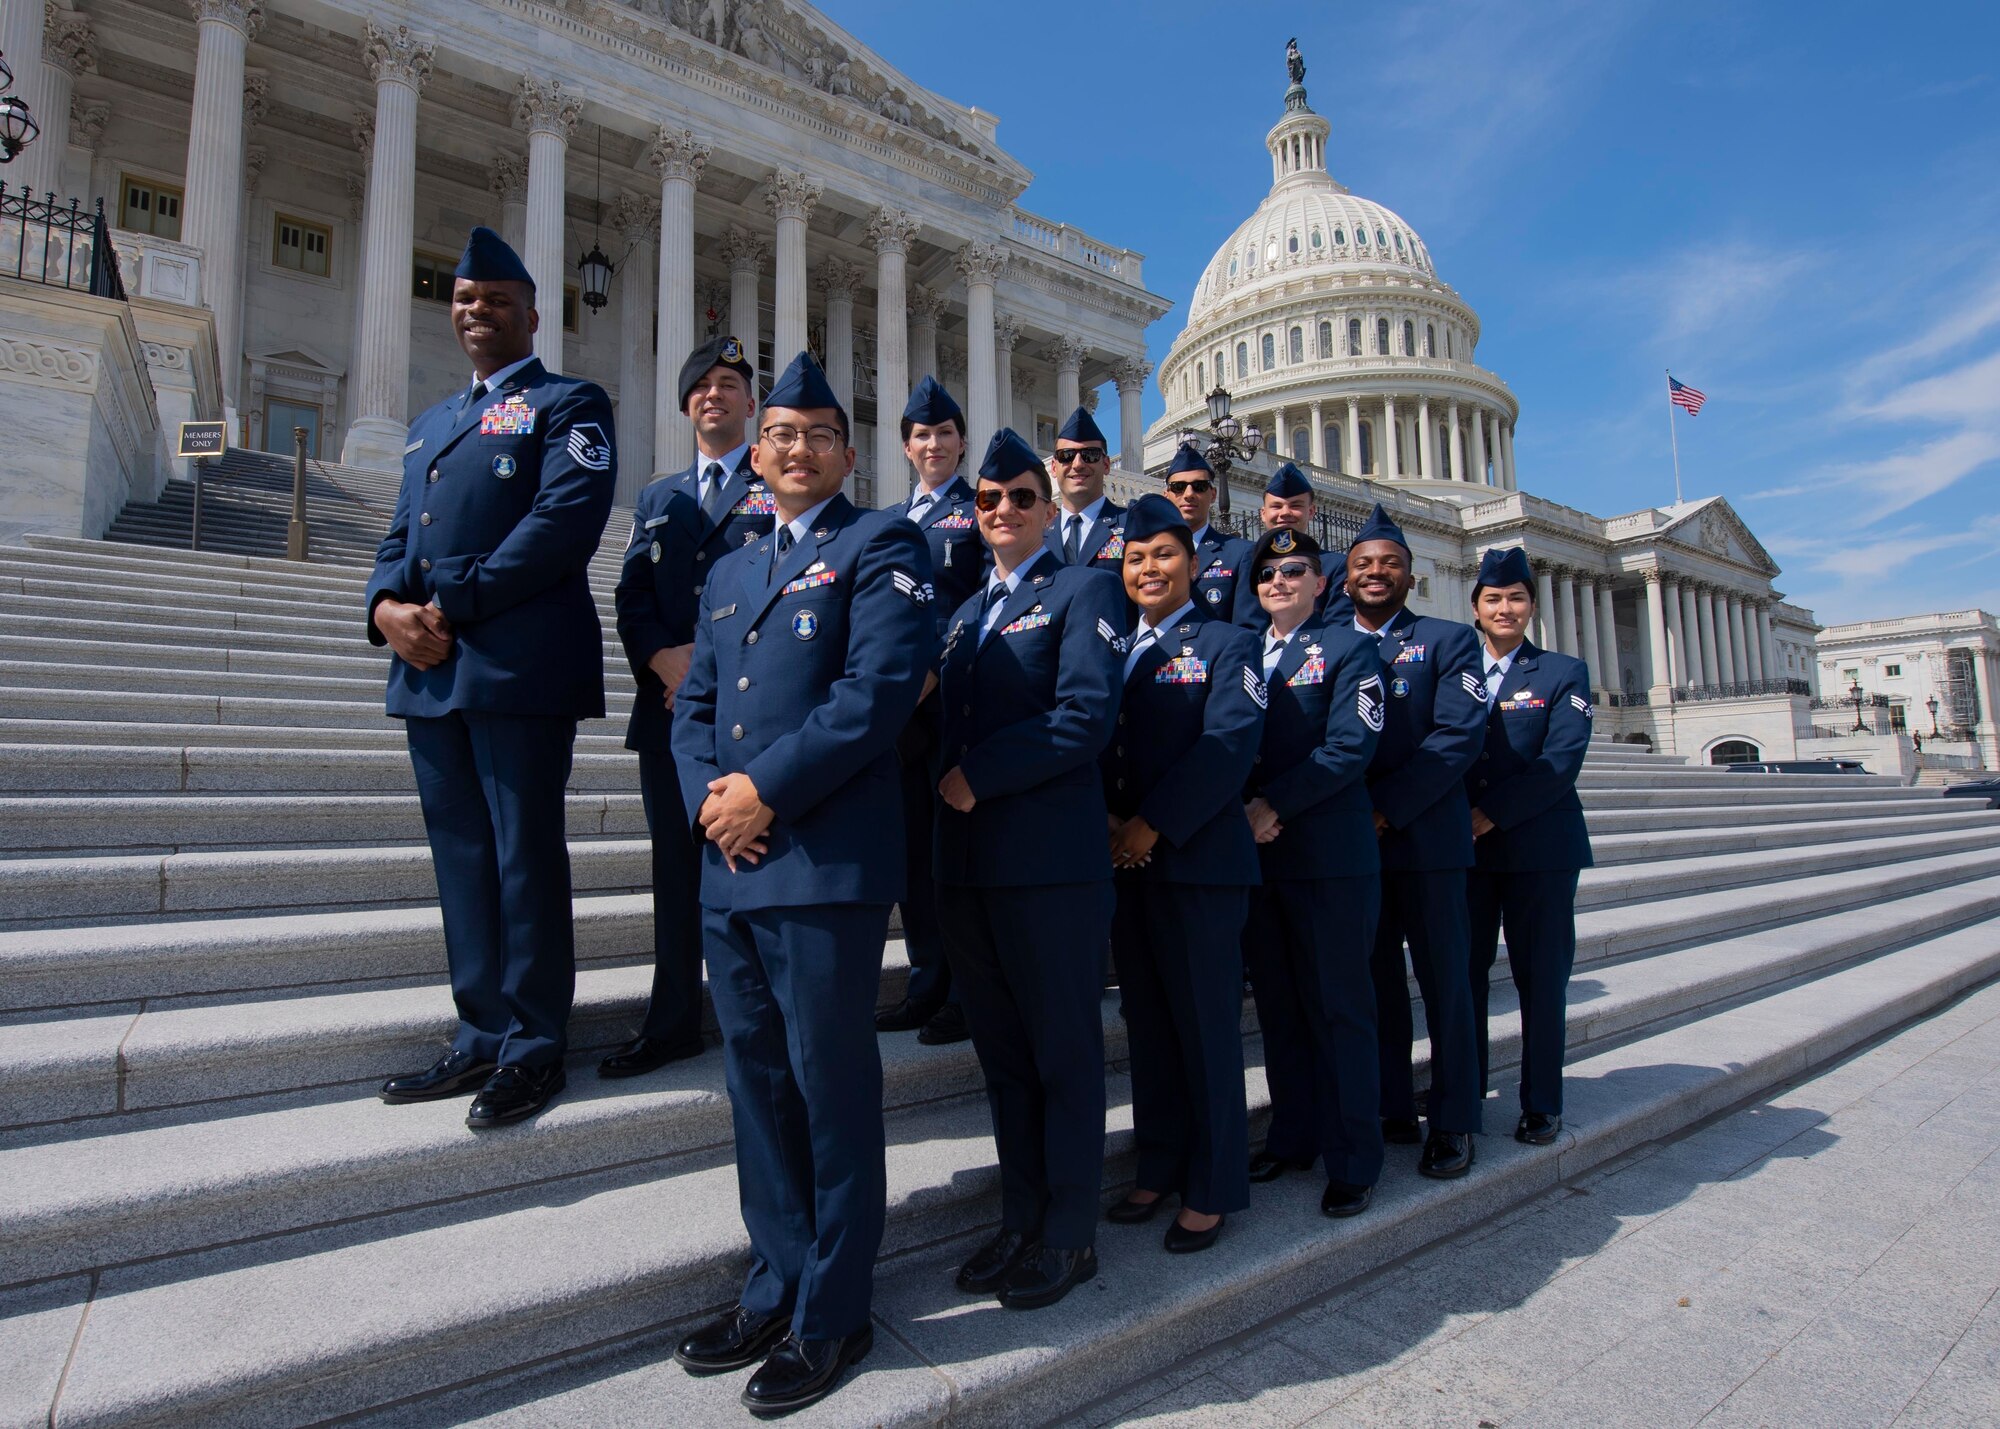 The Air Force’s 2022 12 Outstanding Airmen of the Year pose for a photo in front of the U.S. Capitol Building in Washington, D.C., Sept. 21, 2022. Each awardee was selected based on their superior leadership, job performance and personal achievement. (U.S. Air Force photo by Staff Sgt. Nick Z. Erwin)